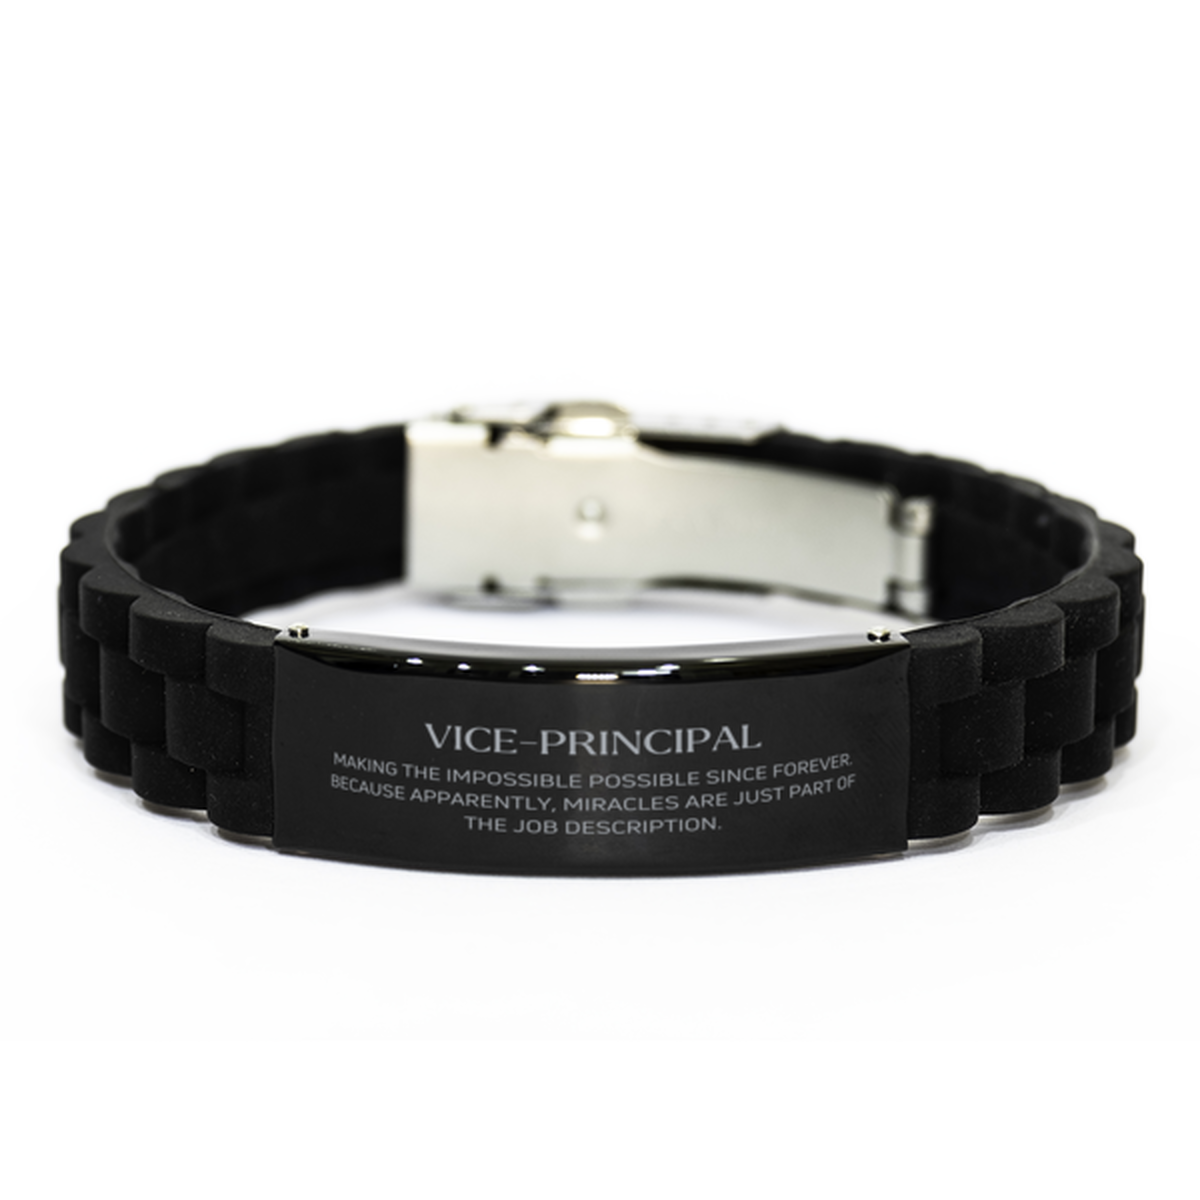 Funny Vice-principal Gifts, Miracles are just part of the job description, Inspirational Birthday Black Glidelock Clasp Bracelet For Vice-principal, Men, Women, Coworkers, Friends, Boss